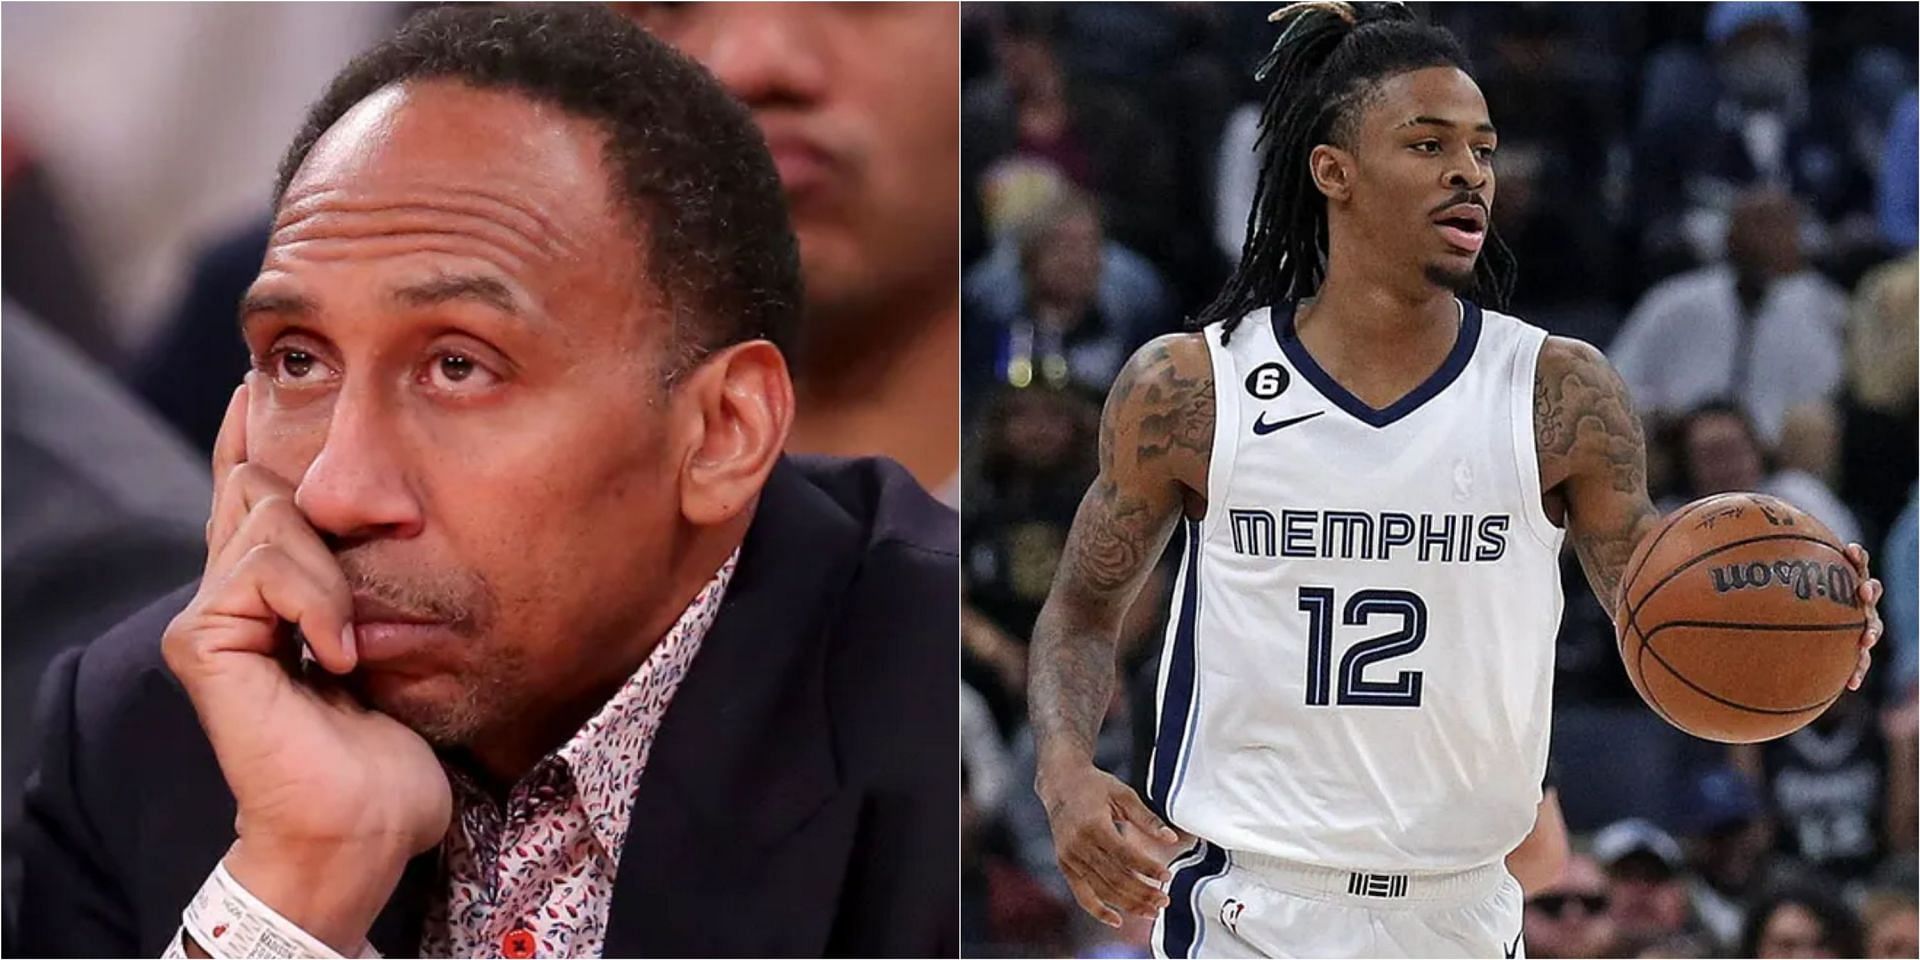 Furious Stephen A. Smith slams Ja Morant&rsquo;s &lsquo;vague&rsquo; press conference